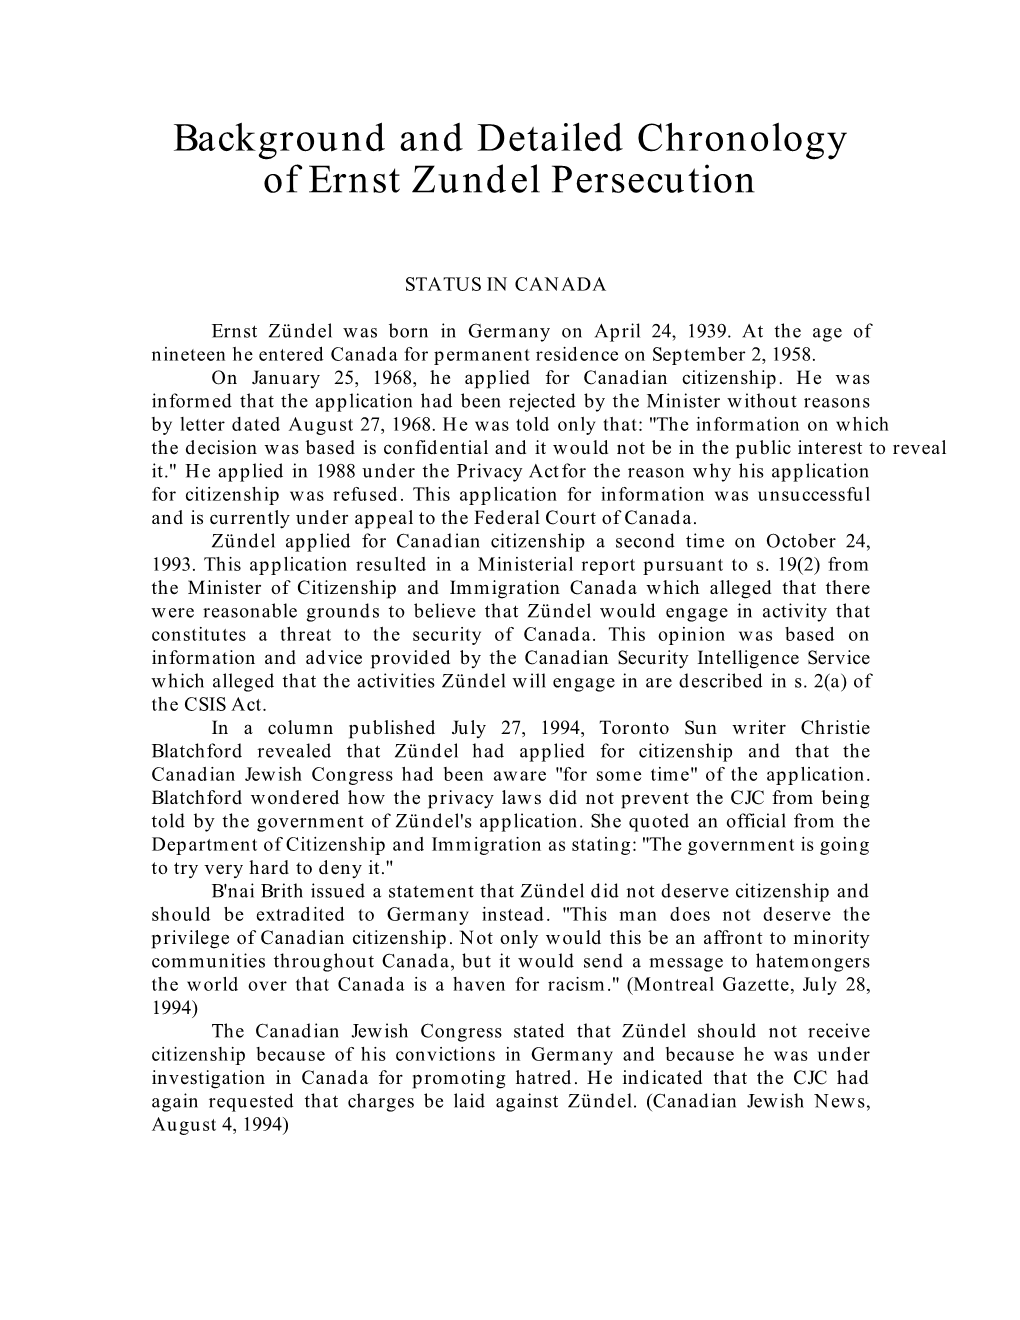 Background and Detailed Chronology of Ernst Zundel Persecution